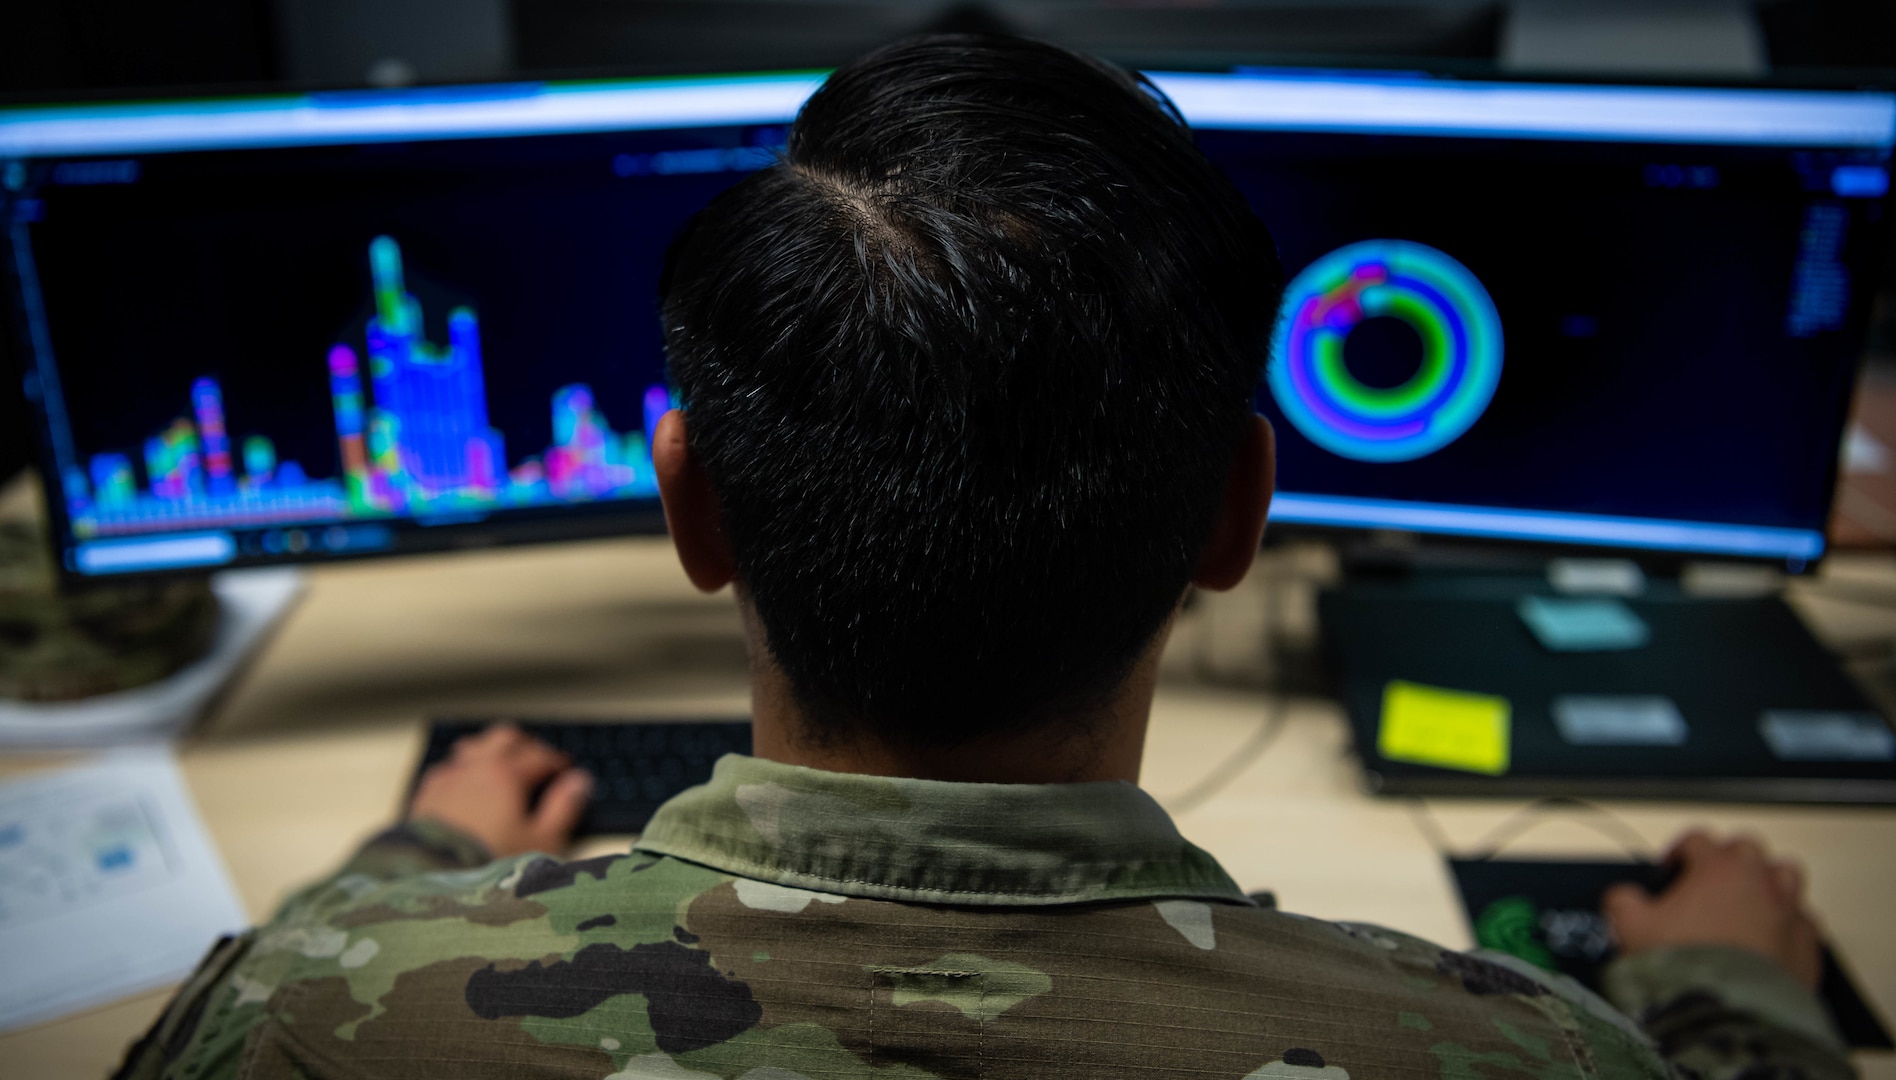 U.S. Air Force Staff Sgt. Marj Alfaro, 52nd Communications Squadron mission defense team supervisor assigned to Spangdahlem Air Base, Germany, performs network analysis during exercise Tacet Venari at Ramstein Air Base, Germany, May 17, 2022. Tacet Venari is a two-week cyber exercise that enables Airmen to identify, detect and respond to cyber threats.